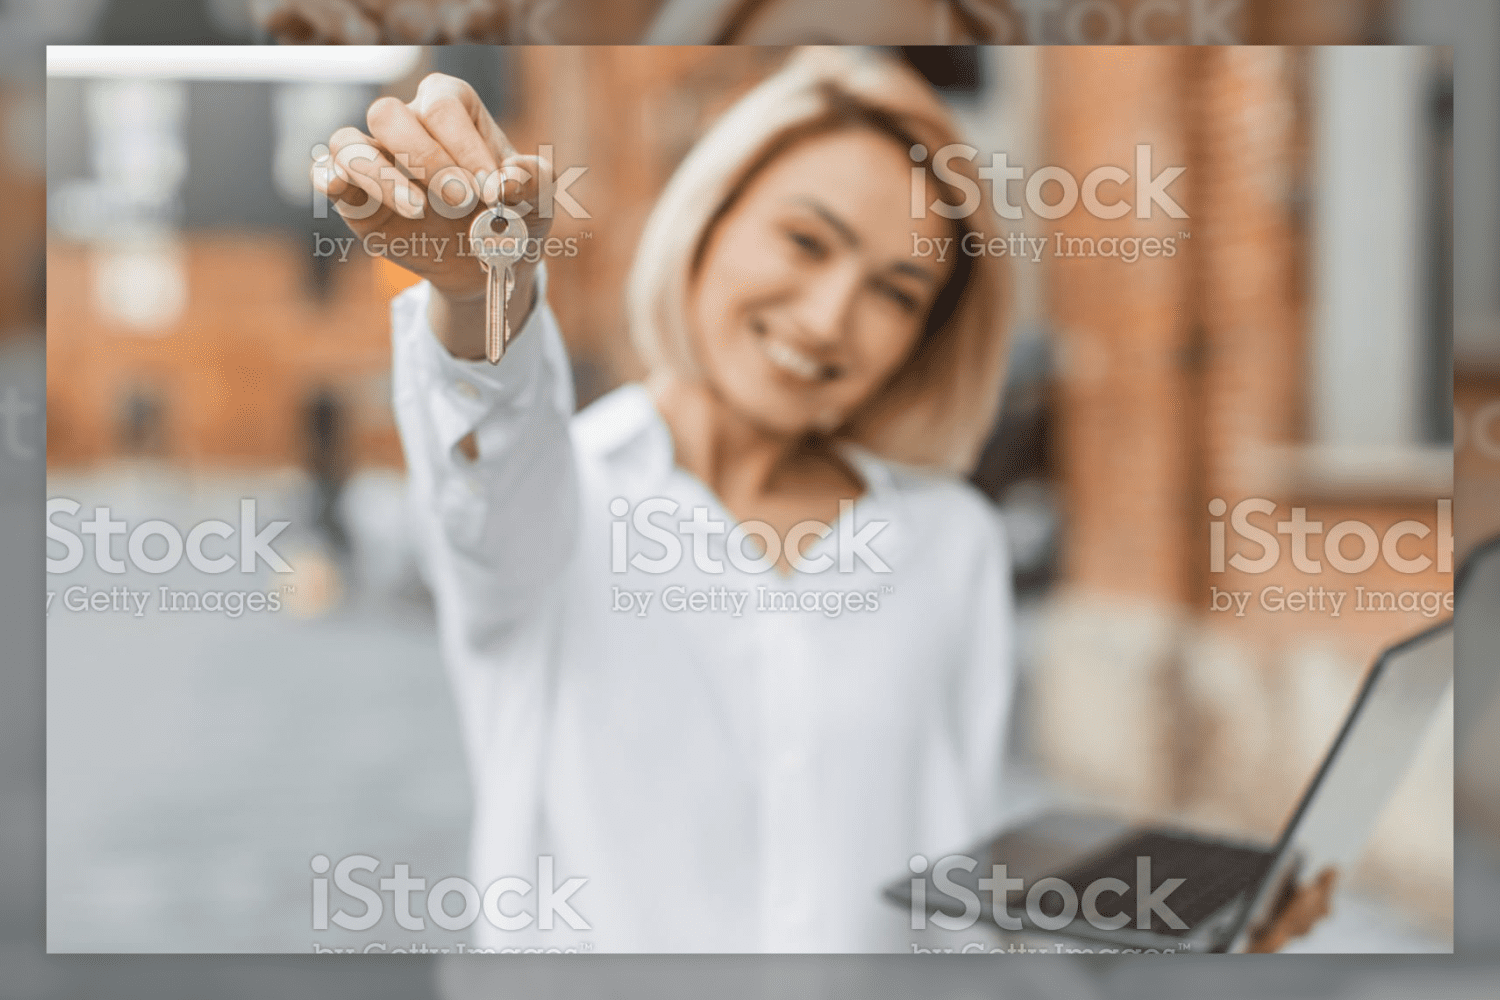 43 focus on woman hand with keys 332